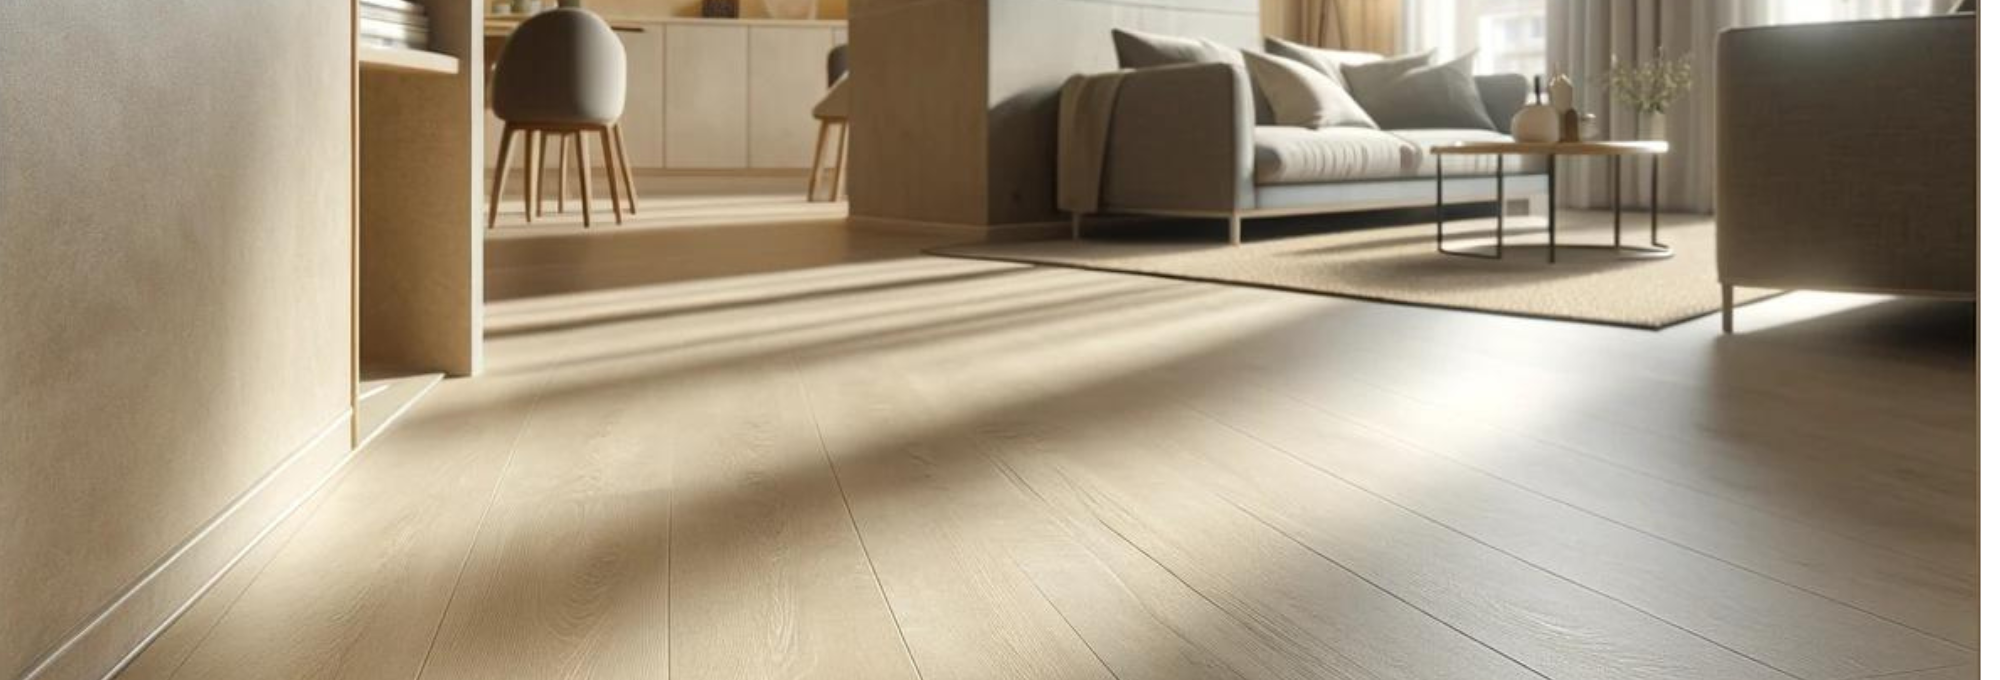 Flooring Services from GoGo Floors in Columbus